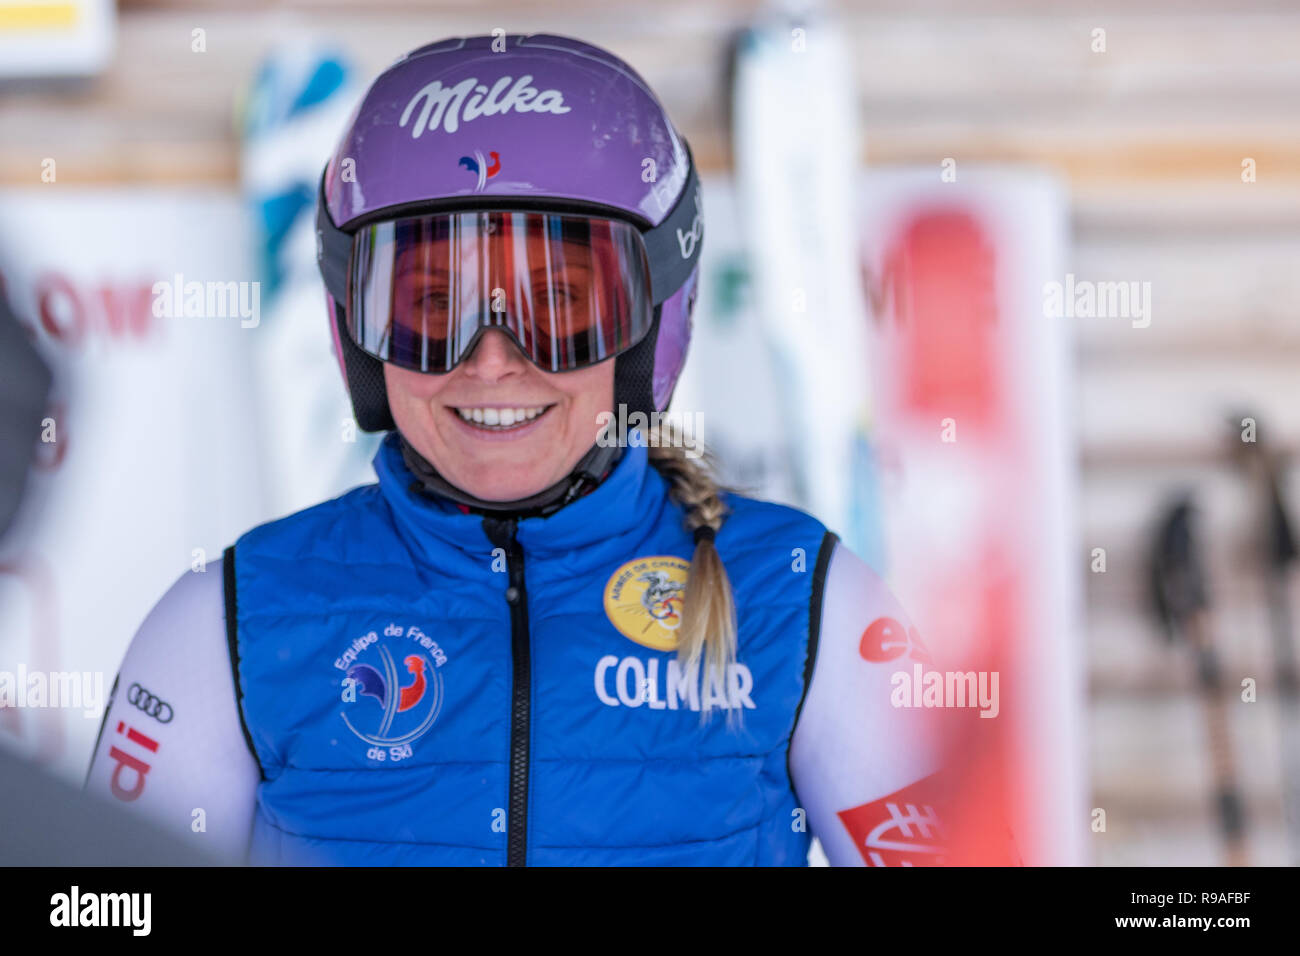 Courchevel, France. 21st December 2018, Courchevel, france. Tessa Worley third place on the podium in Courchevel Ski World Cup Women's Giant Slalom Credit: Fabrizio Malisan/Alamy Live News Stock Photo